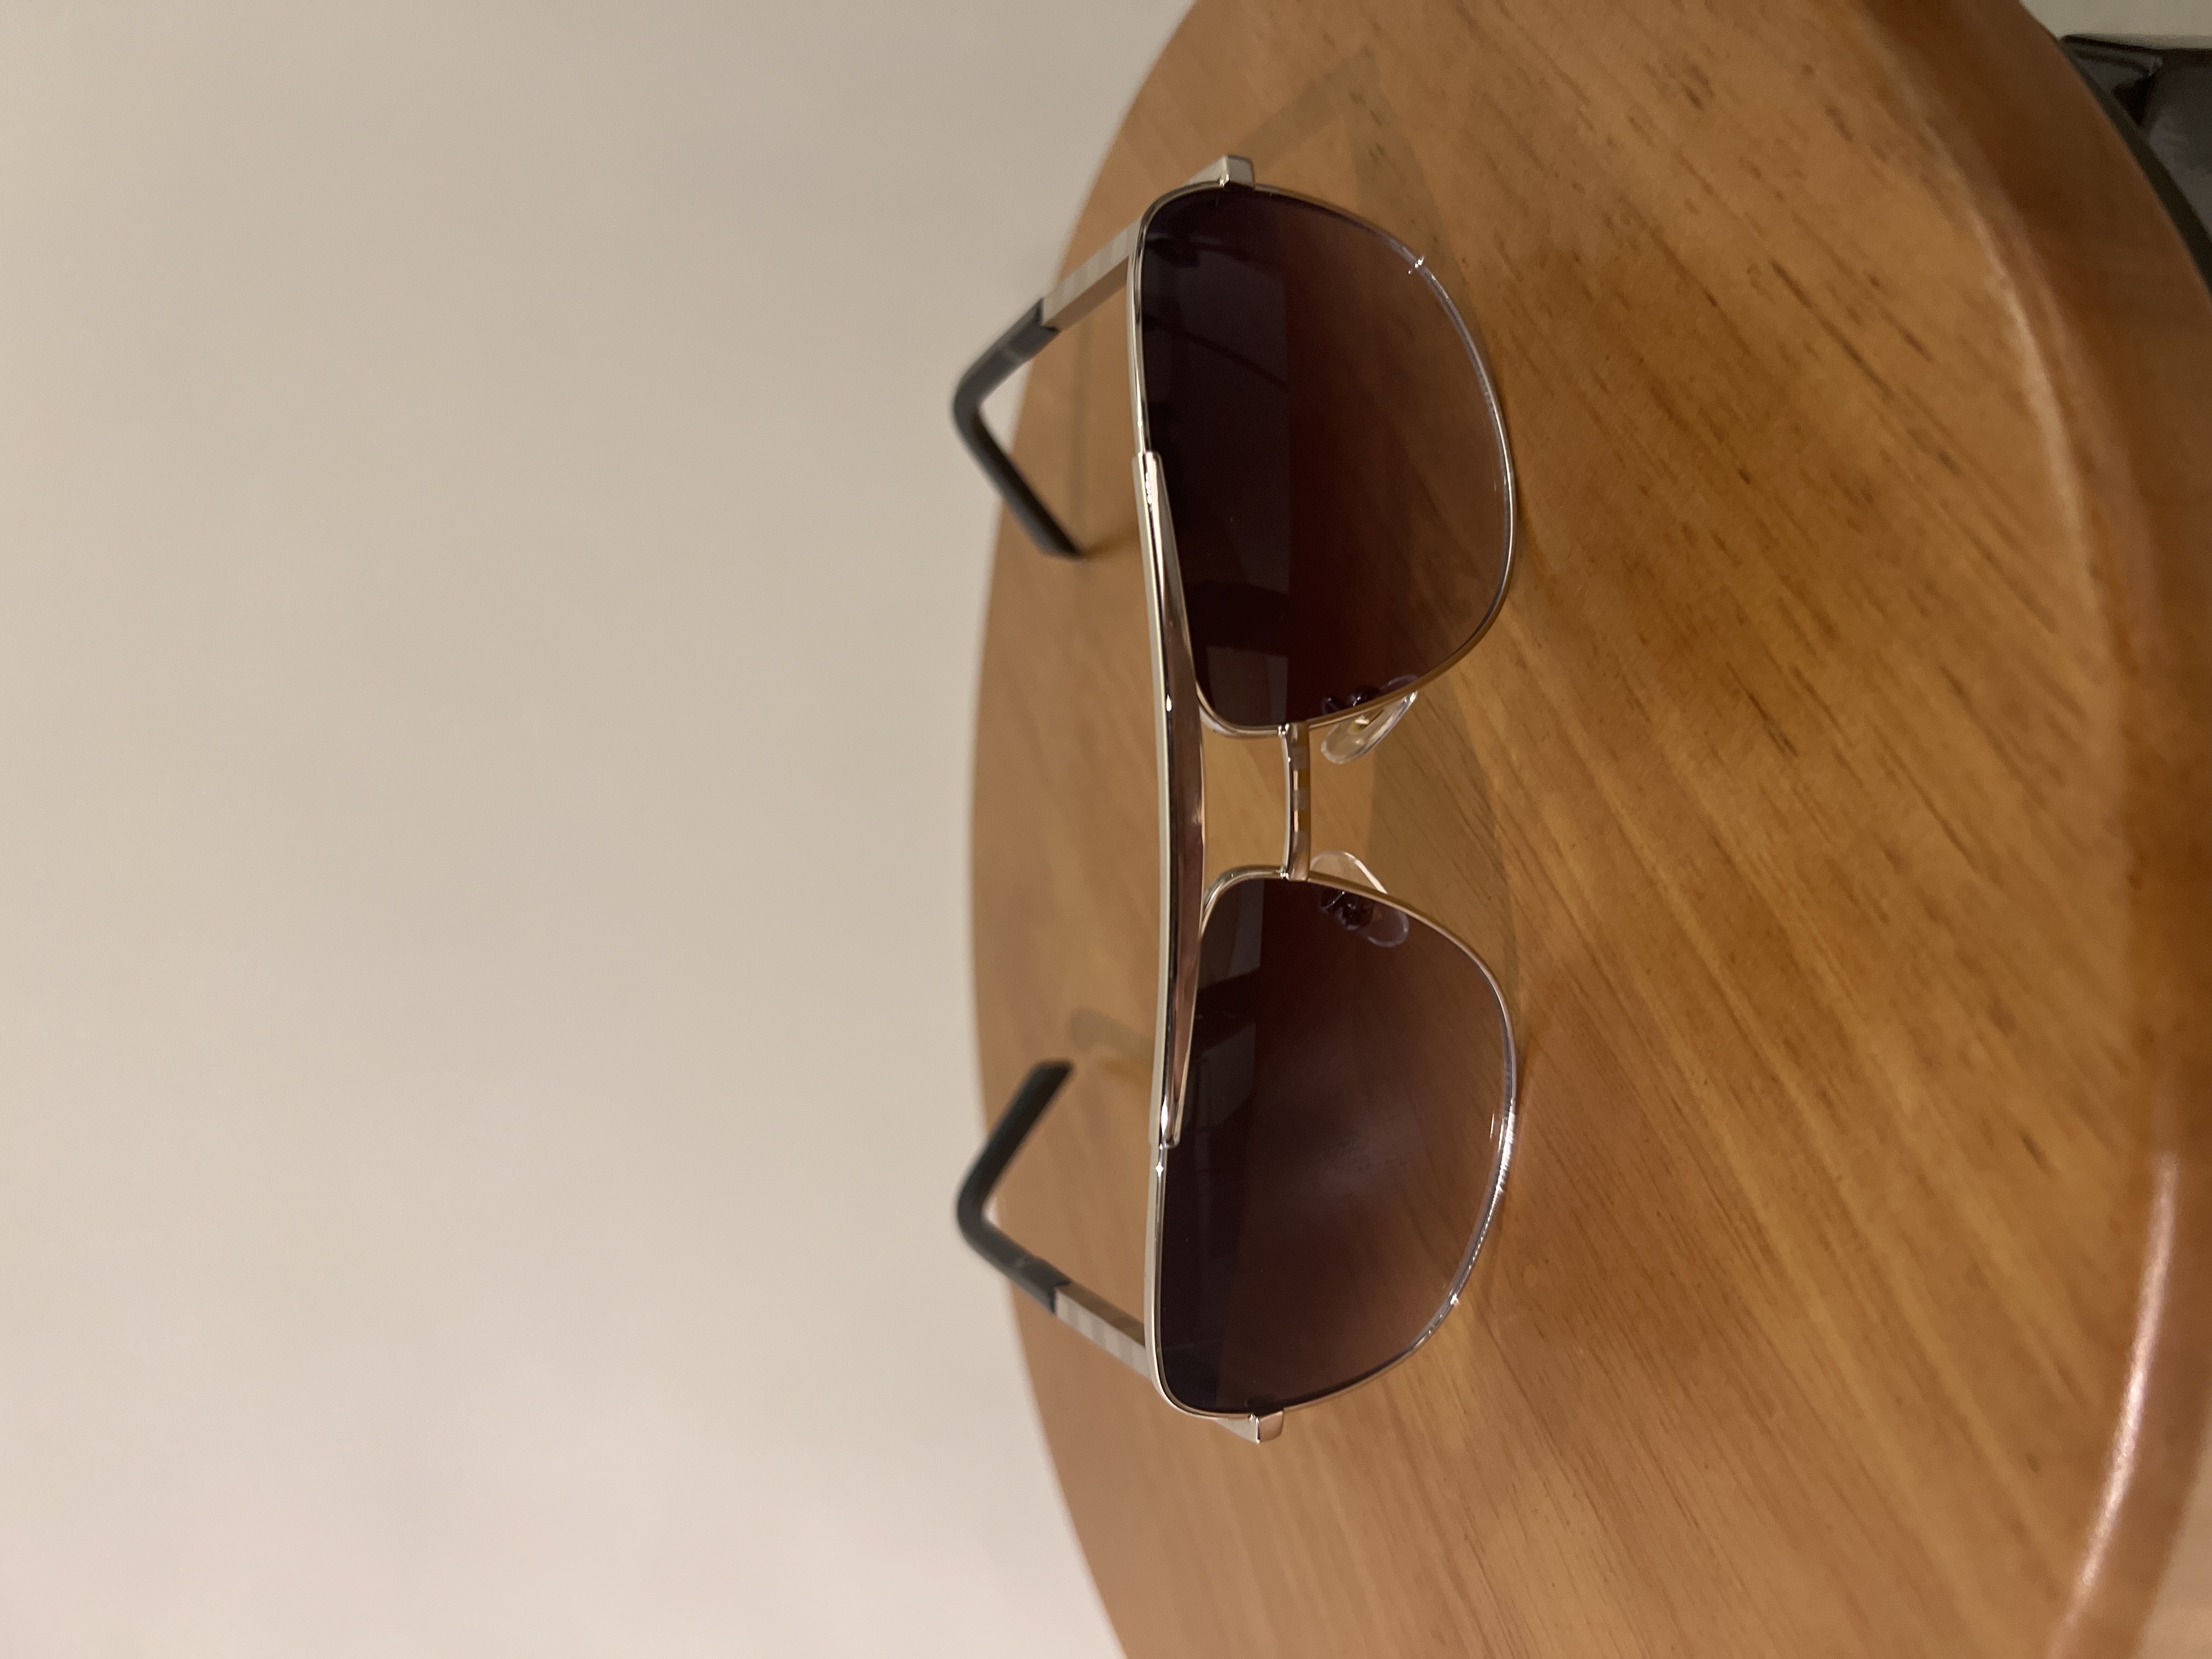 2x1 in Andrew Tate Sunglasses, 6 Colors Available